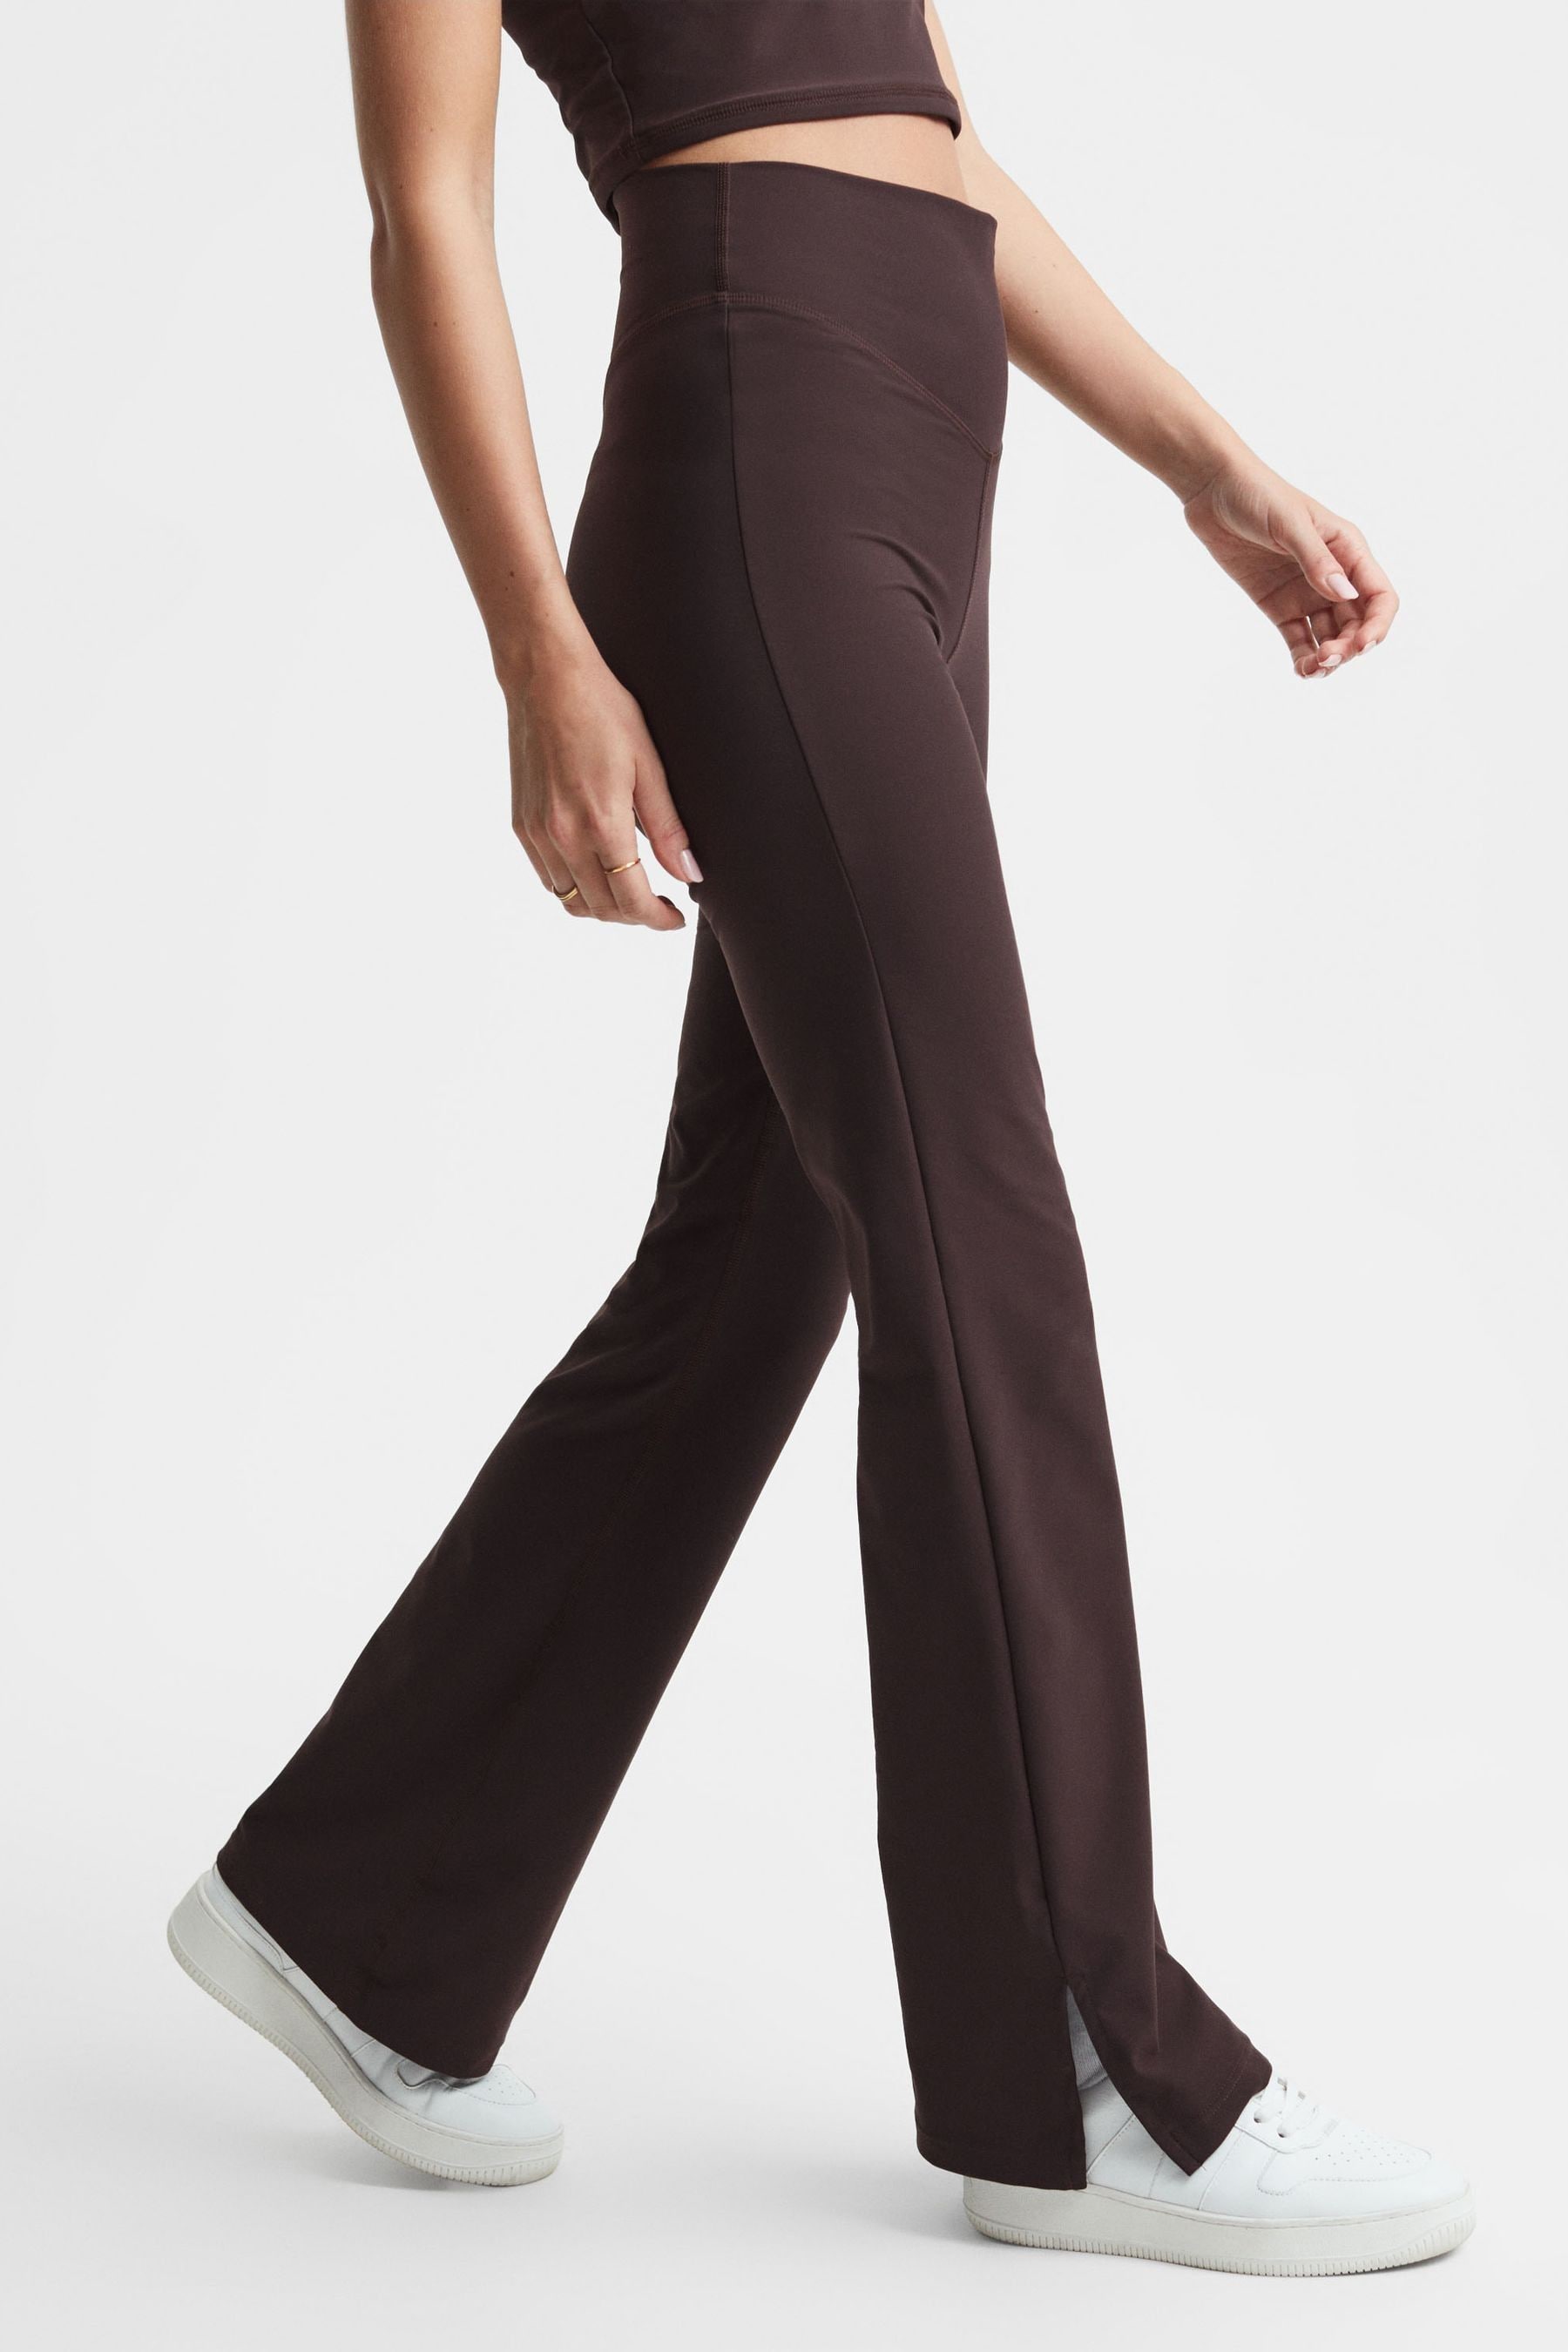 The Upside Florence - High Rise Flared Leggings, Brown